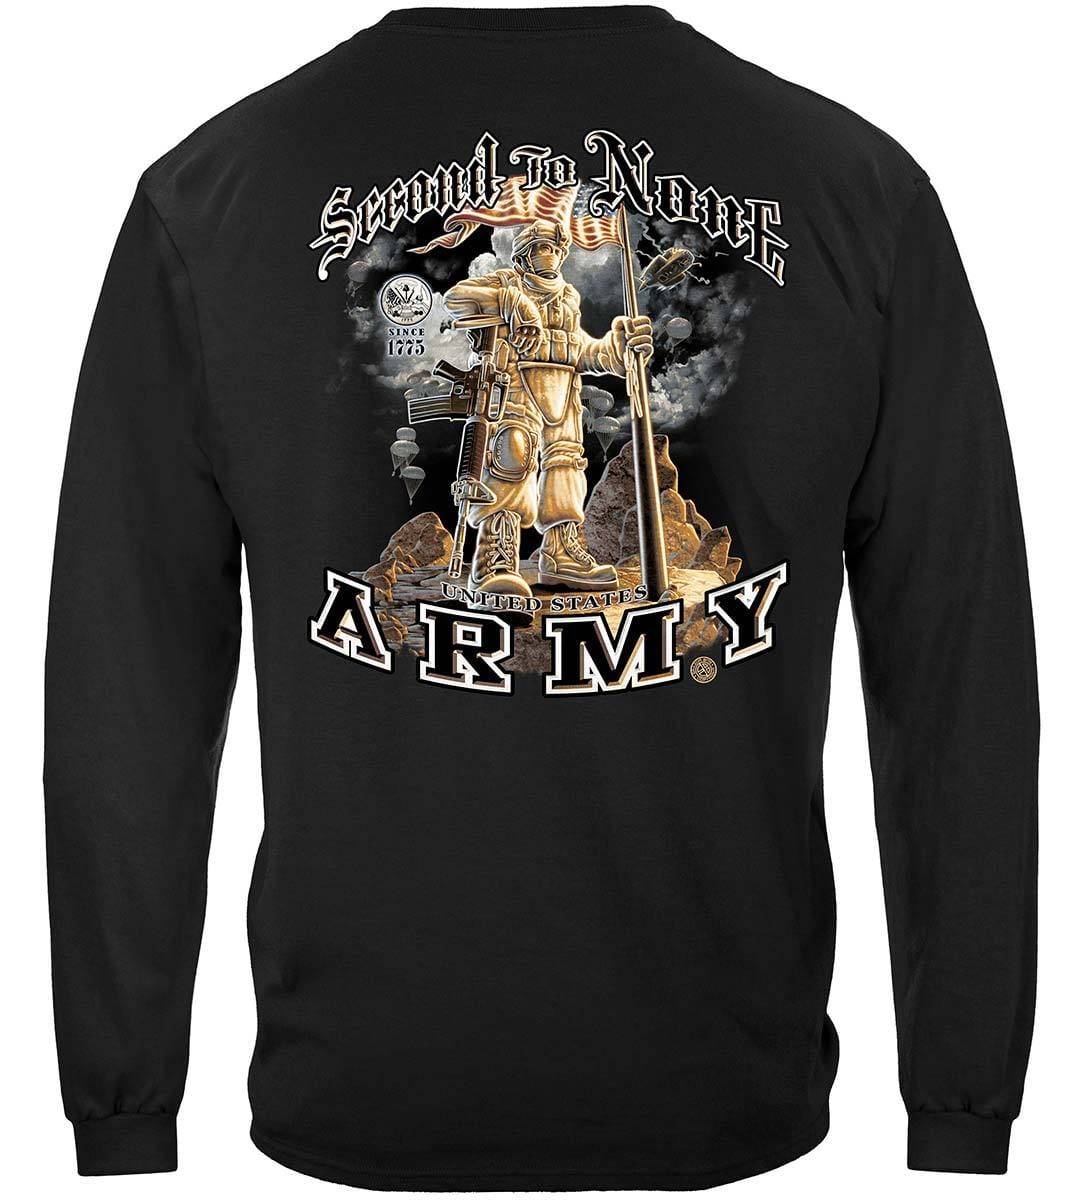 Army Second To None Premium T-Shirt